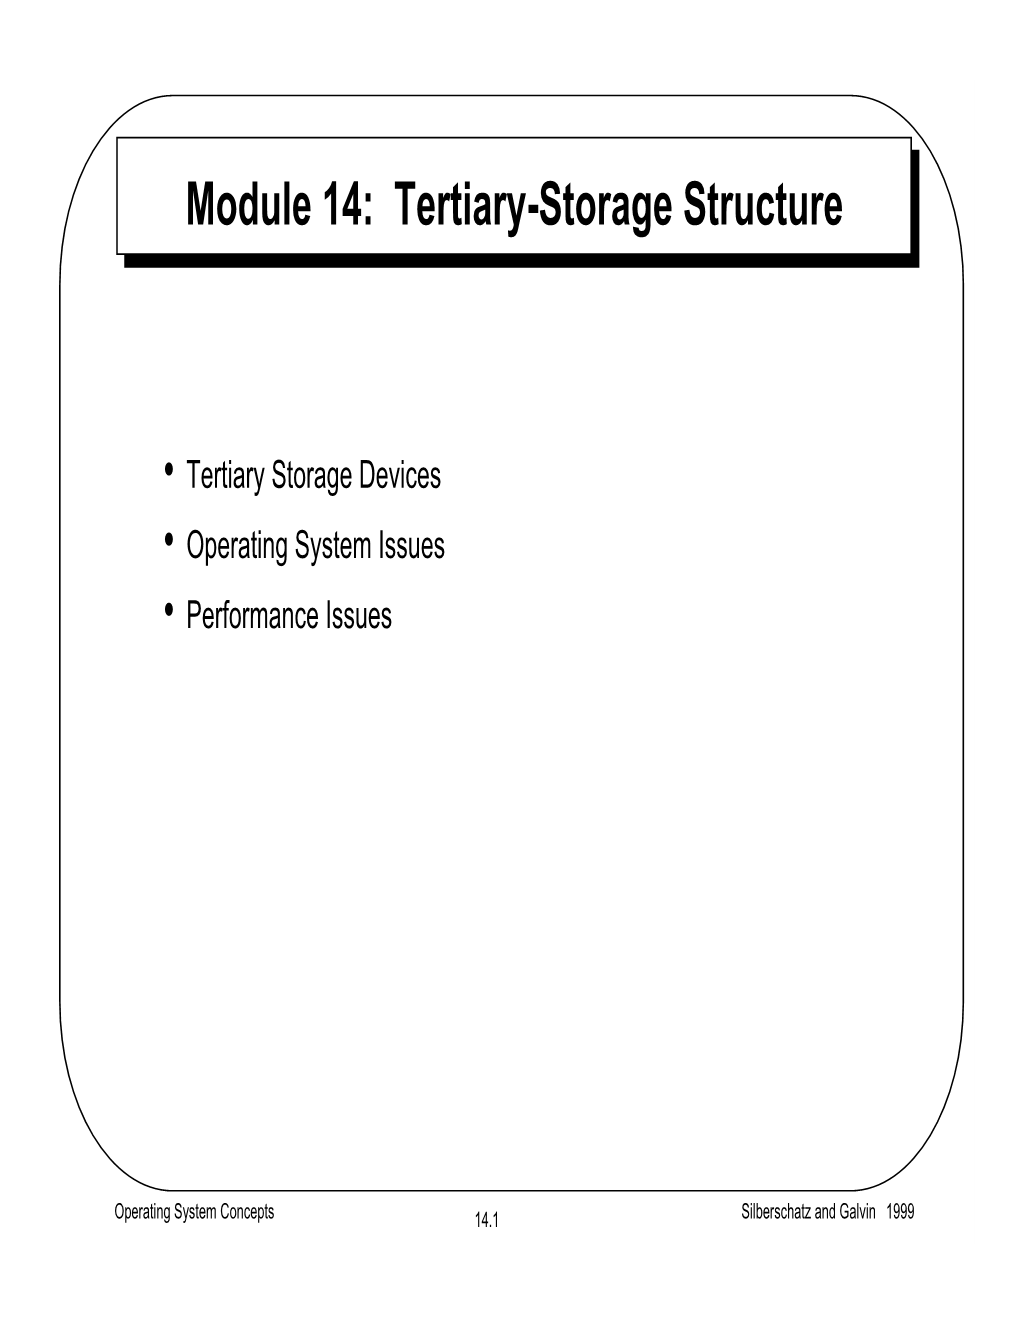 Tertiary Storage Devices • Operating System Issues • Performance Issues